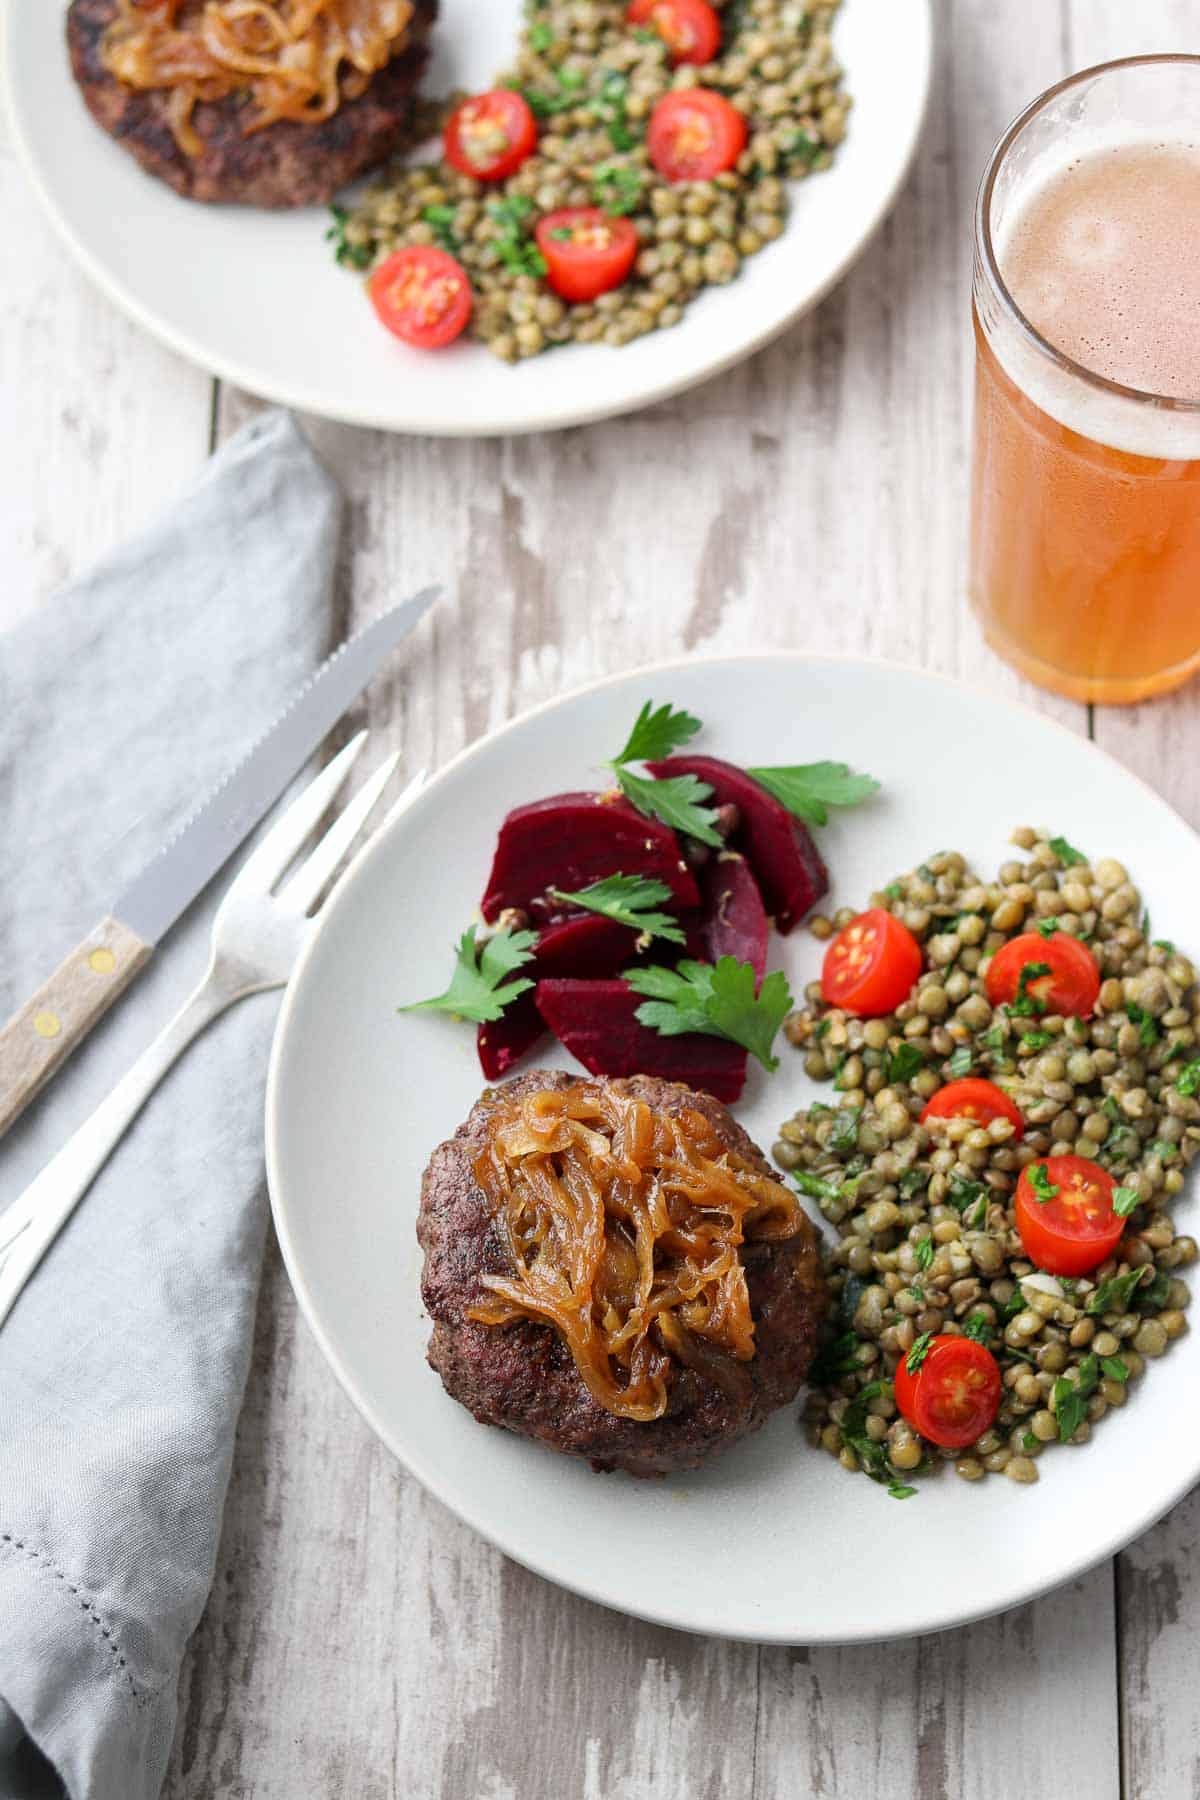 Burger topped with caramelized onions next to roasted beets and lentil salad.